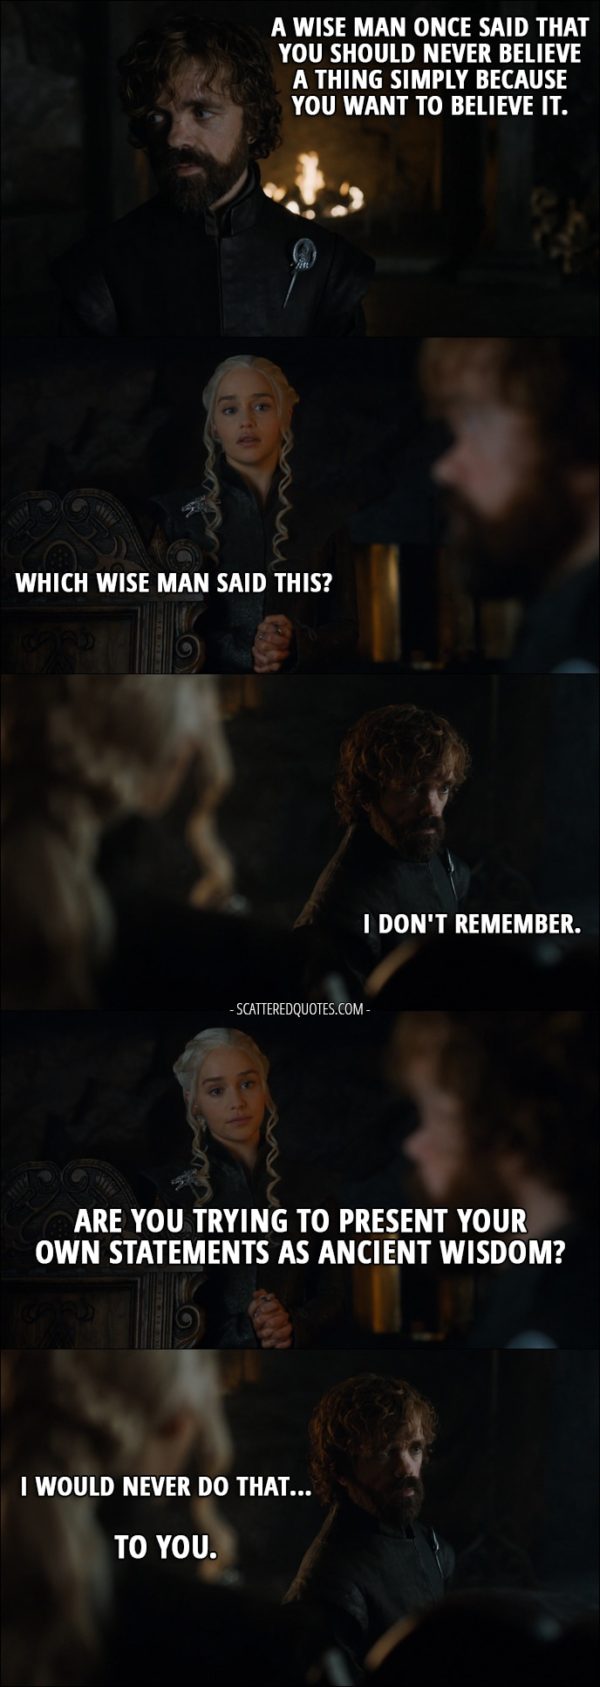 Quote from Game of Thrones 7x03 - Tyrion Lannister: A wise man once said that you should never believe a thing simply because you want to believe it. Daenerys Targaryen: Which wise man said this? Tyrion Lannister: I don't remember. Daenerys Targaryen: Are you trying to present your own statements as ancient wisdom? Tyrion Lannister: I would never do that... To you.